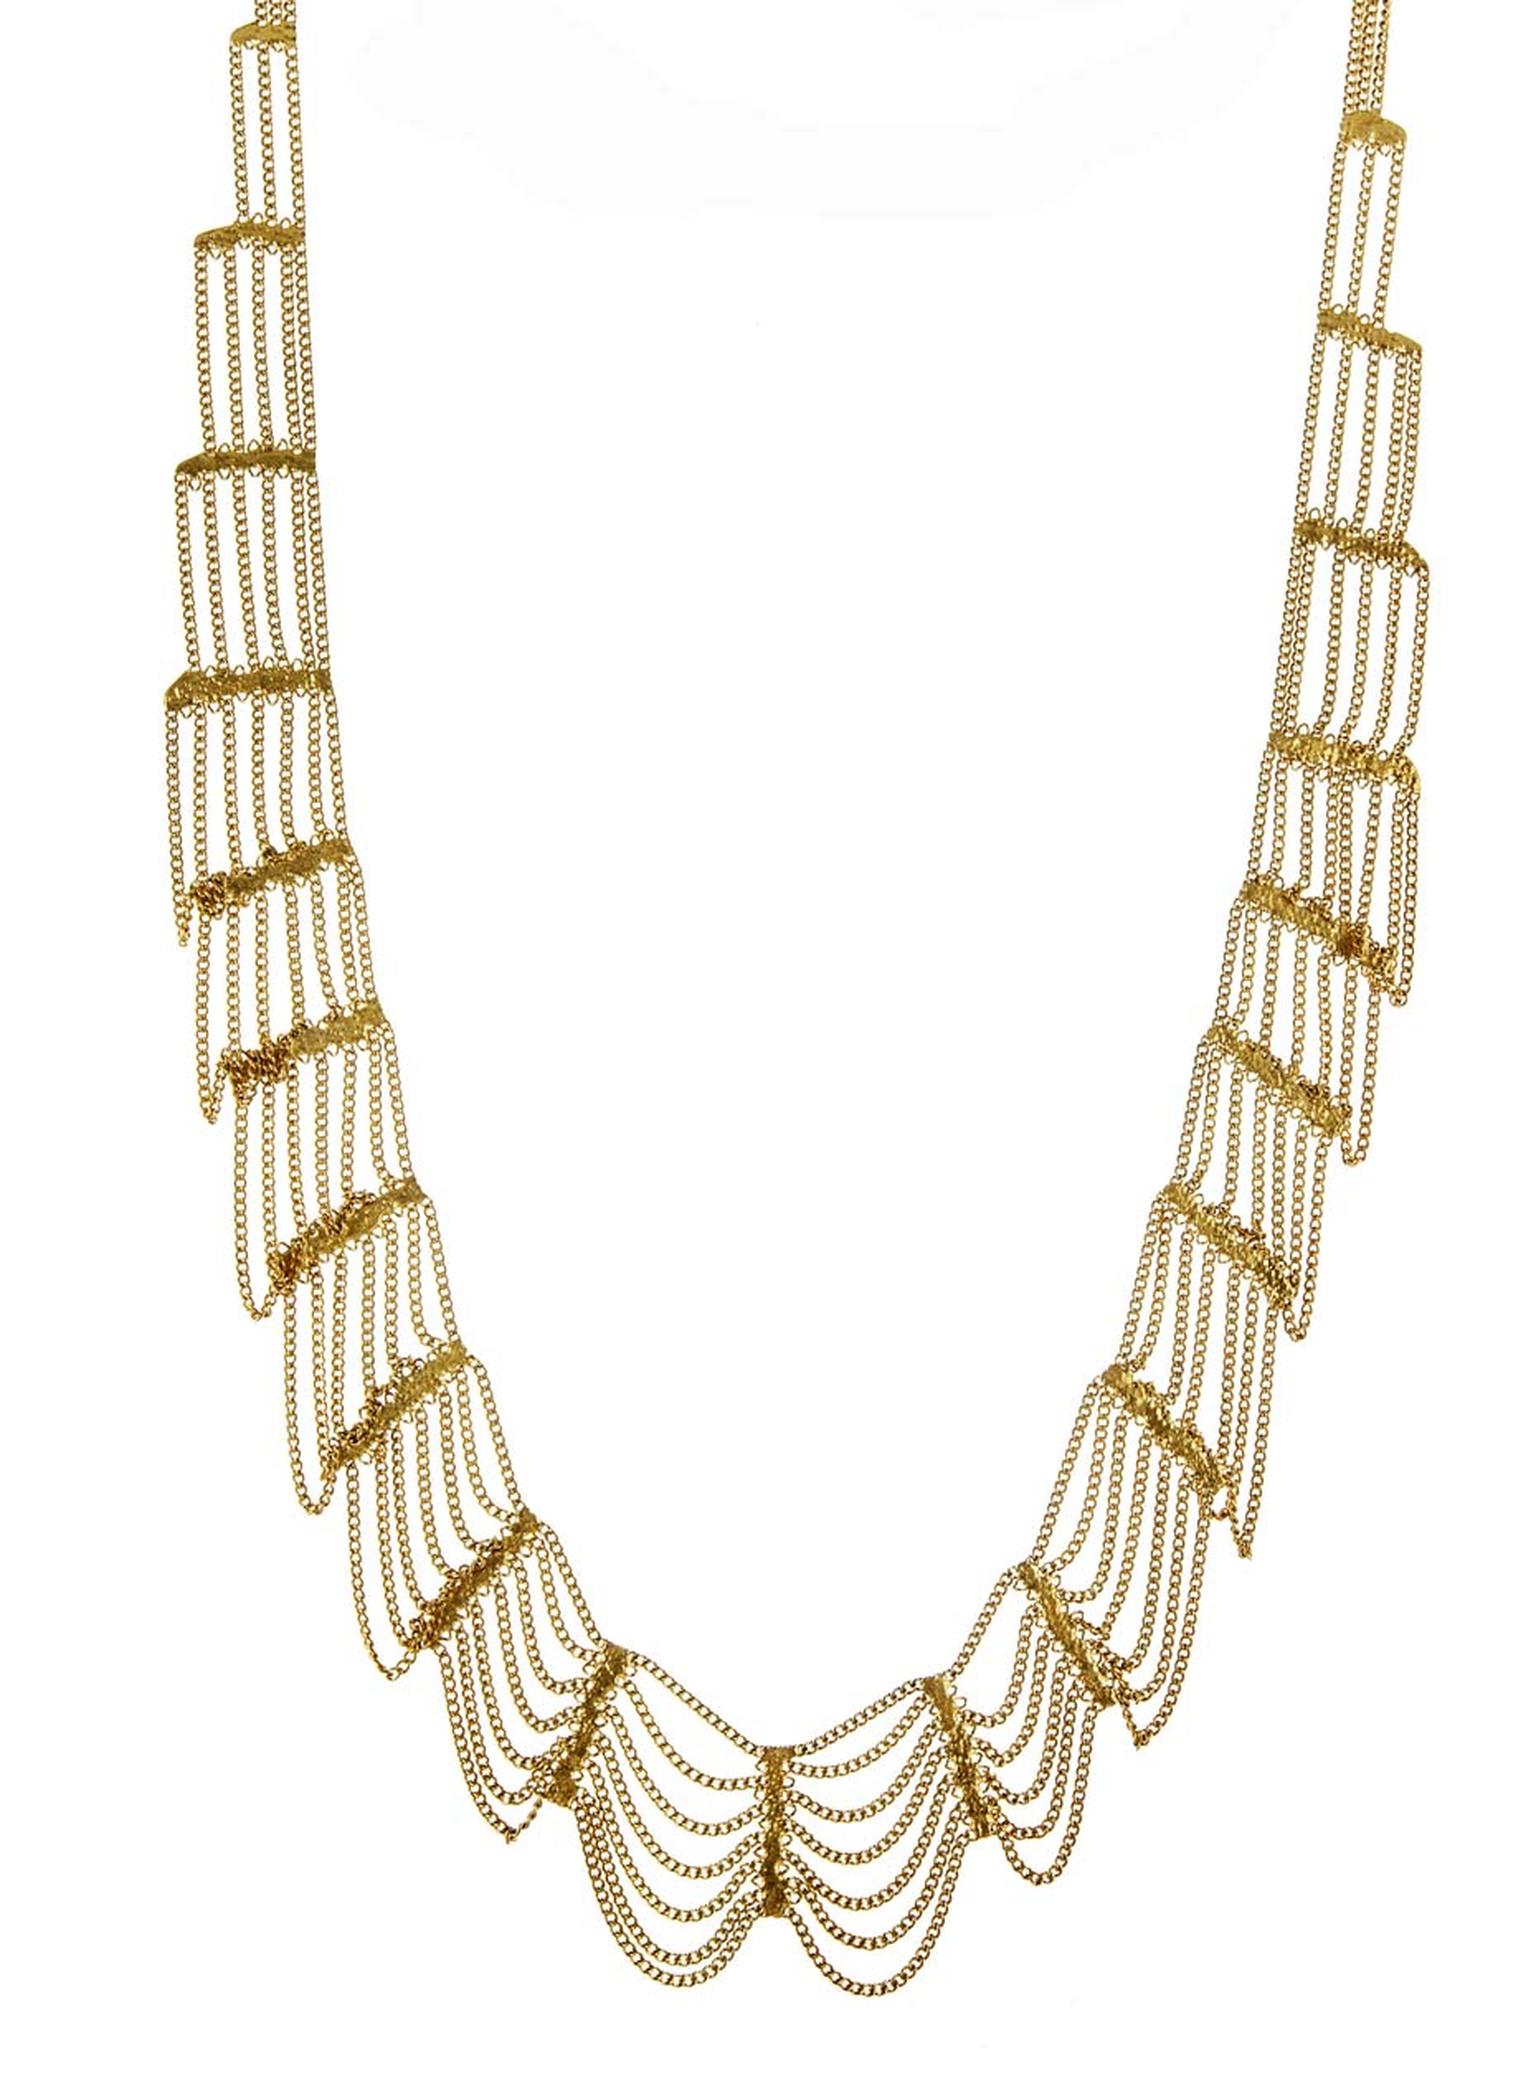 Hannah Keefe Willow necklace in gold plated brass ($480).